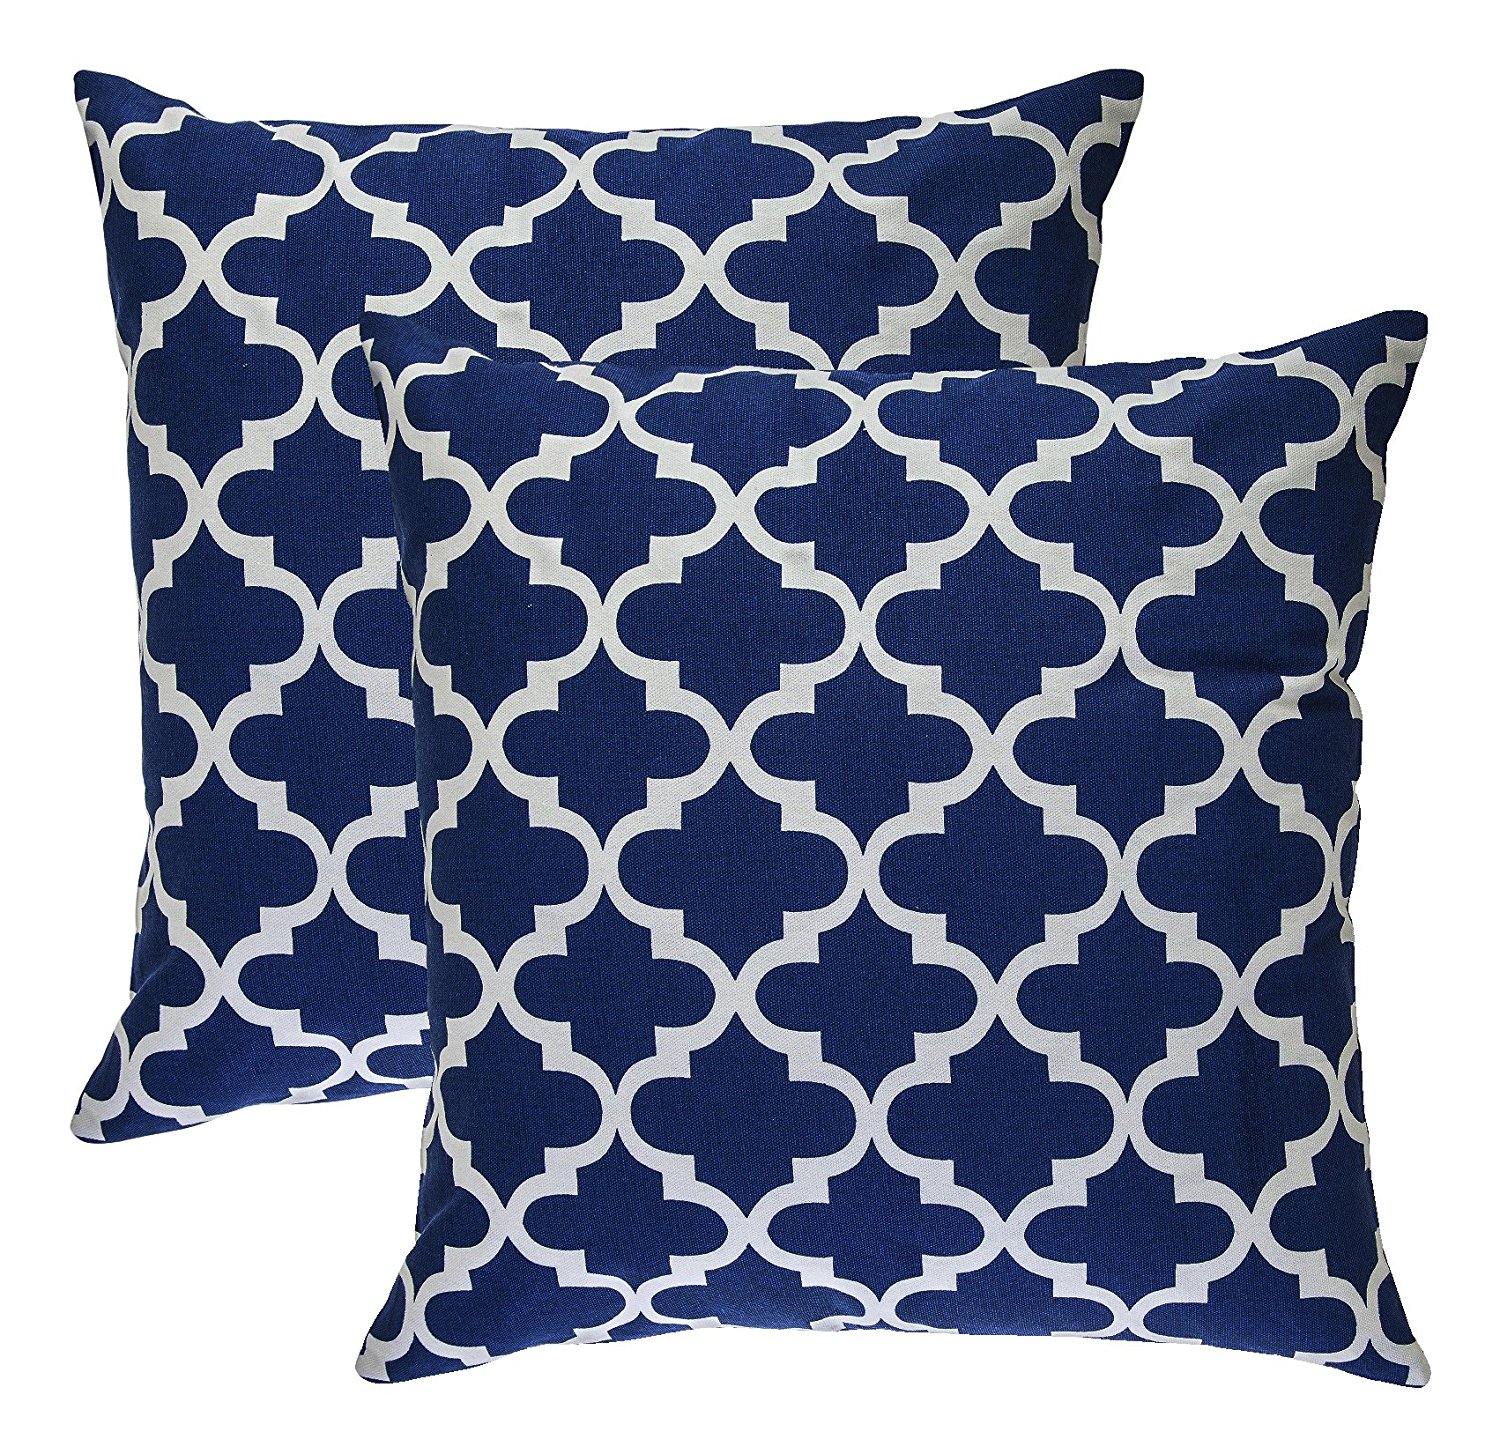 TreeWool, Cotton Canvas Trellis Accent Decorative Throw Pillowcases (2 Cushion Covers; 18 x 18 Inches; Navy Blue & White)